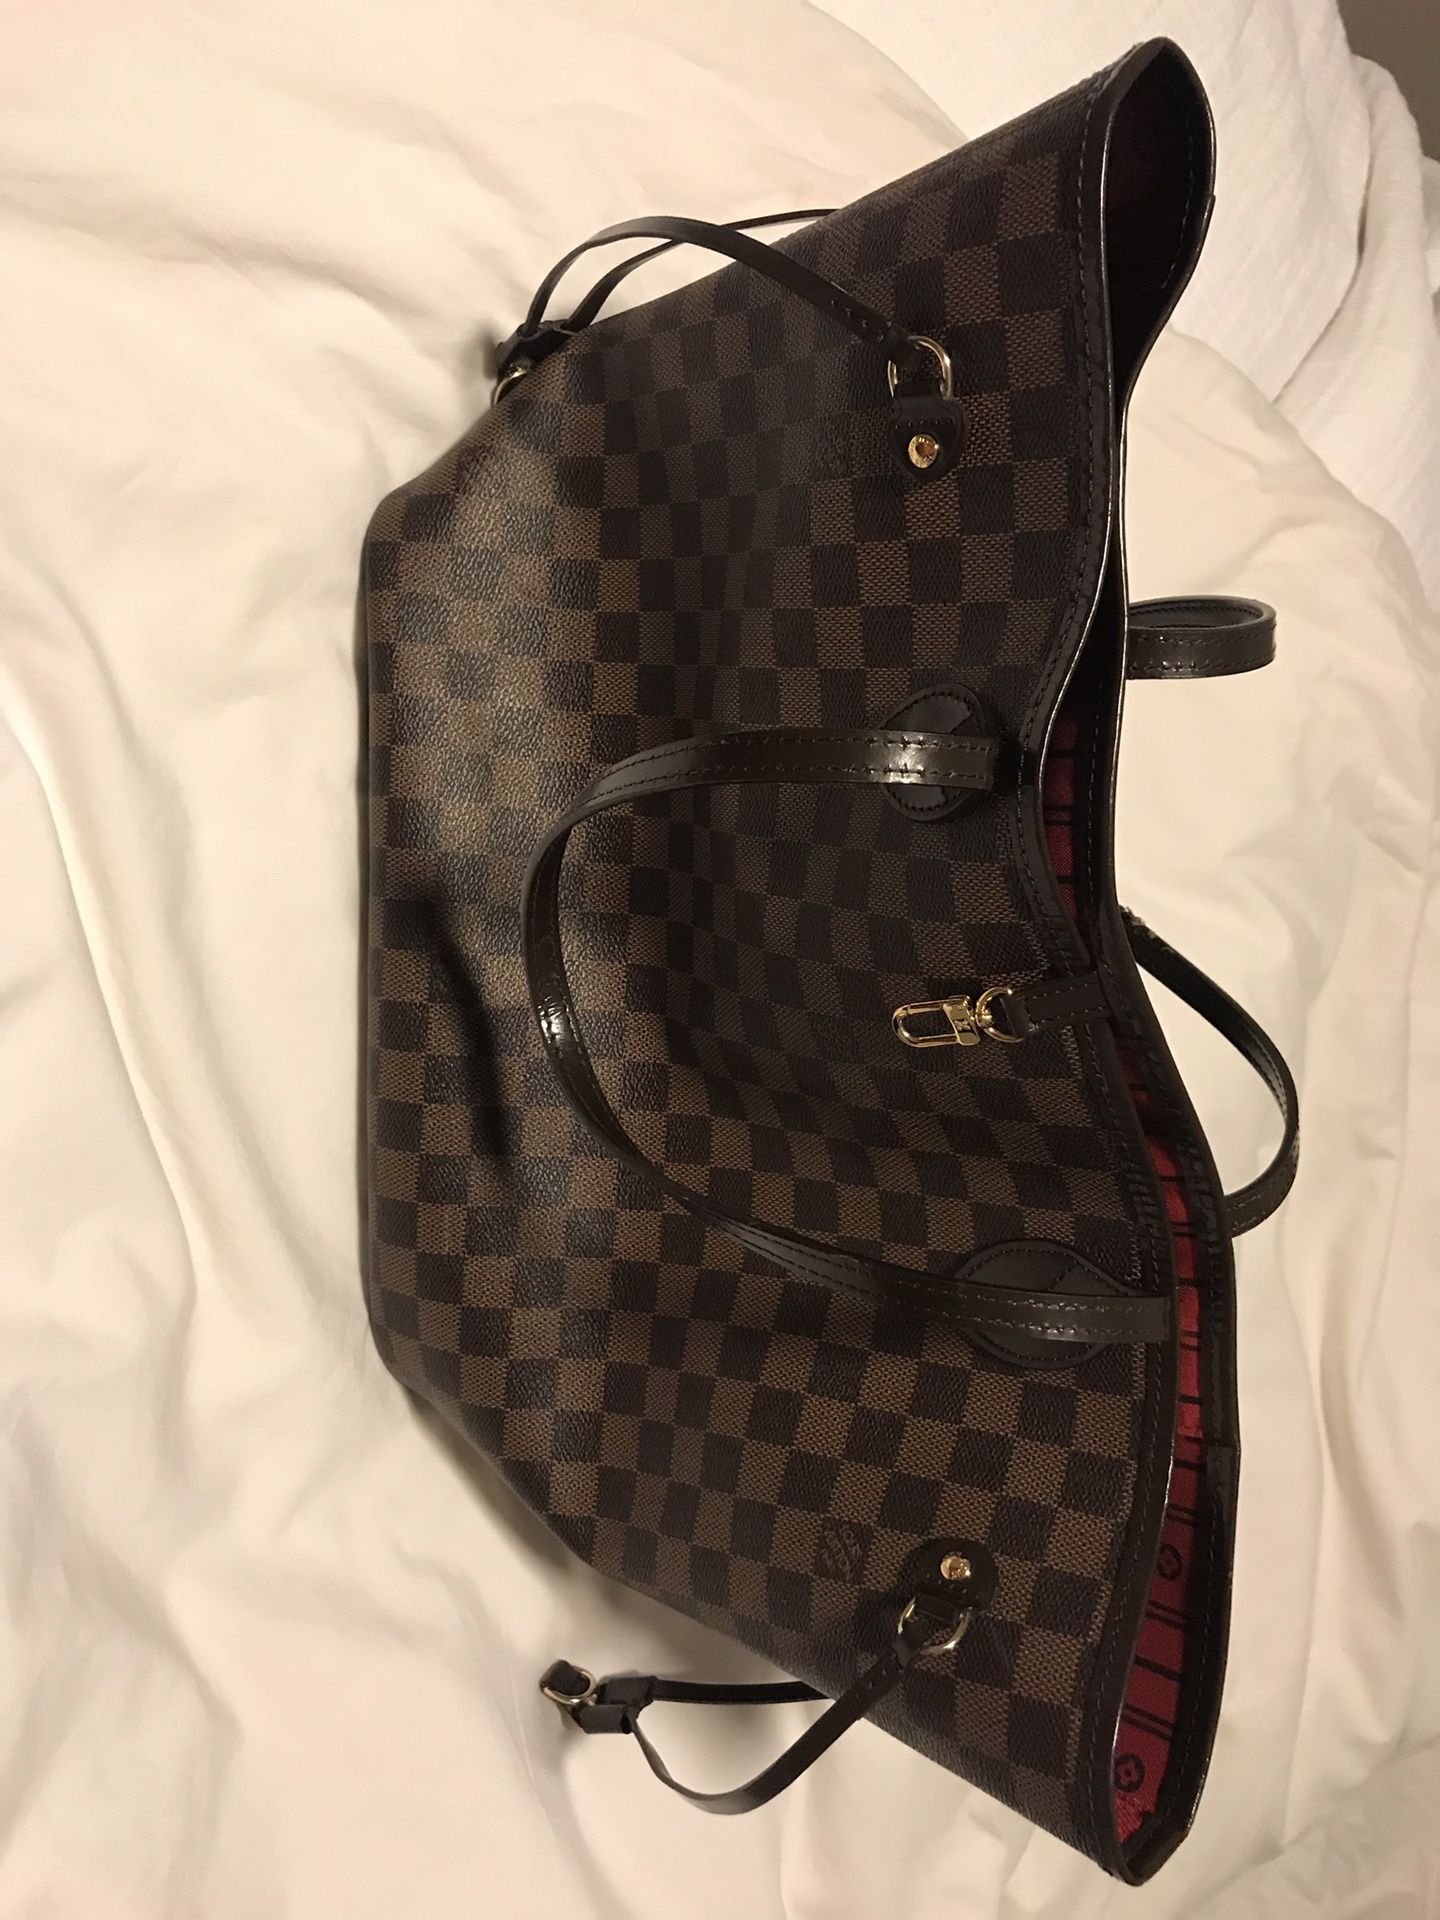 Authentic Like New Louis Vuitton Alma bb Please Check More Pictures Show  Shape for Sale in Oak Lawn, IL - OfferUp